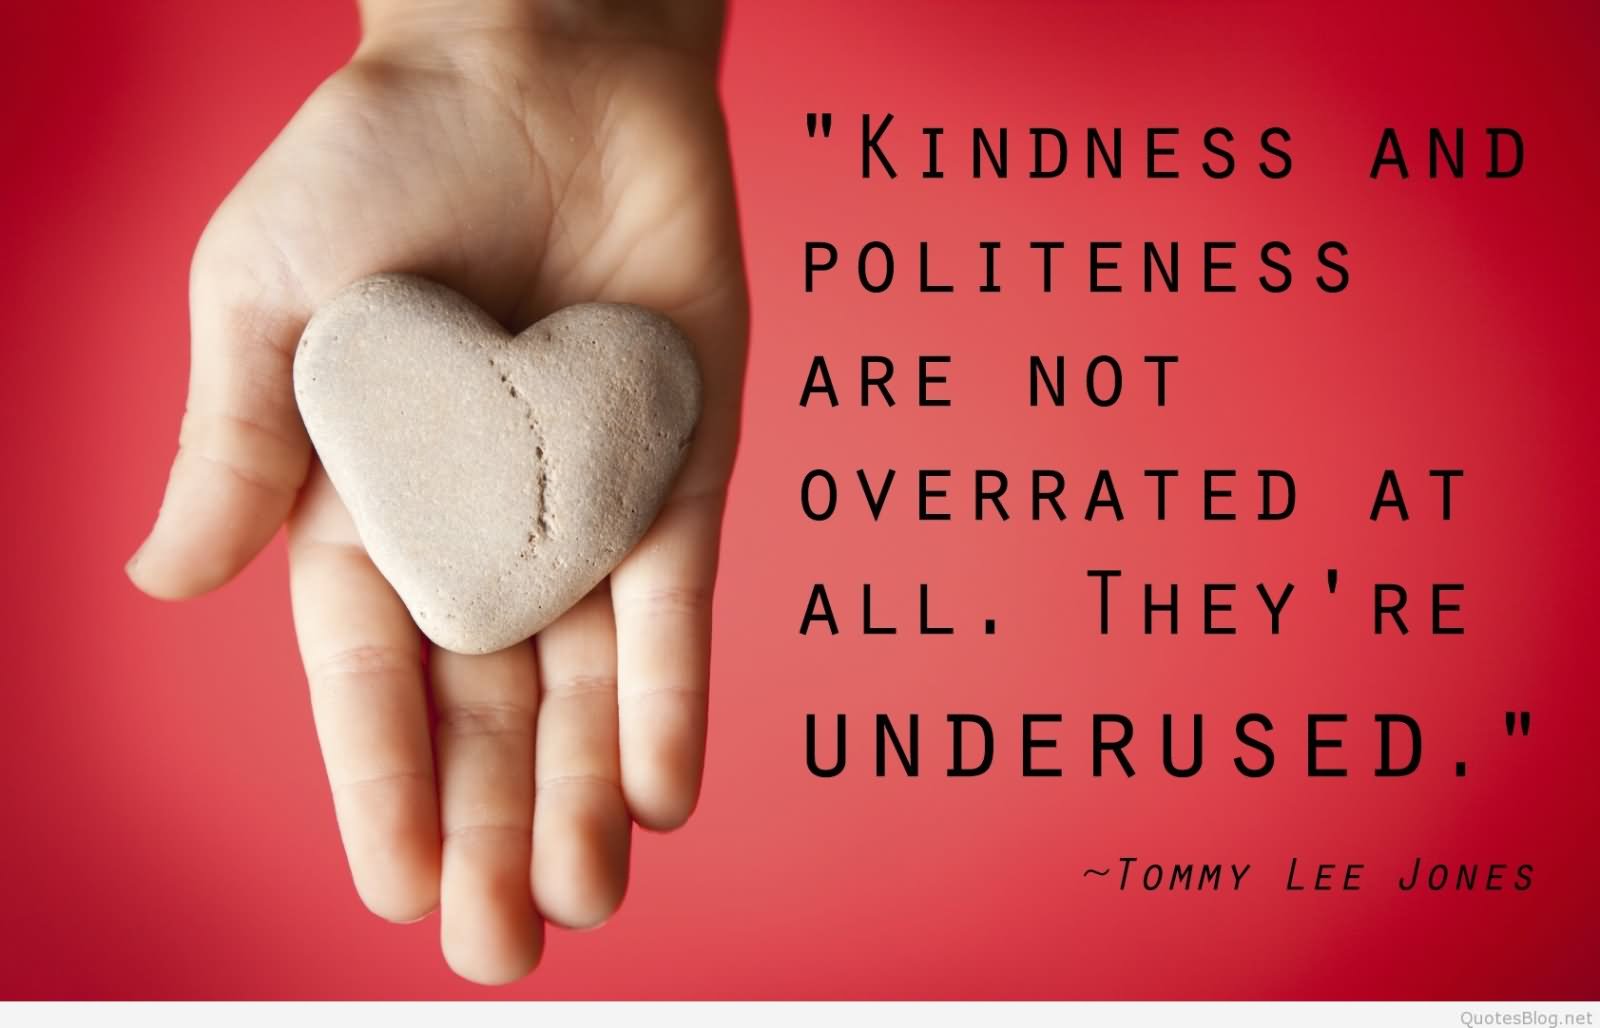 Kindness and politeness are not overrated at all. They’re underused.